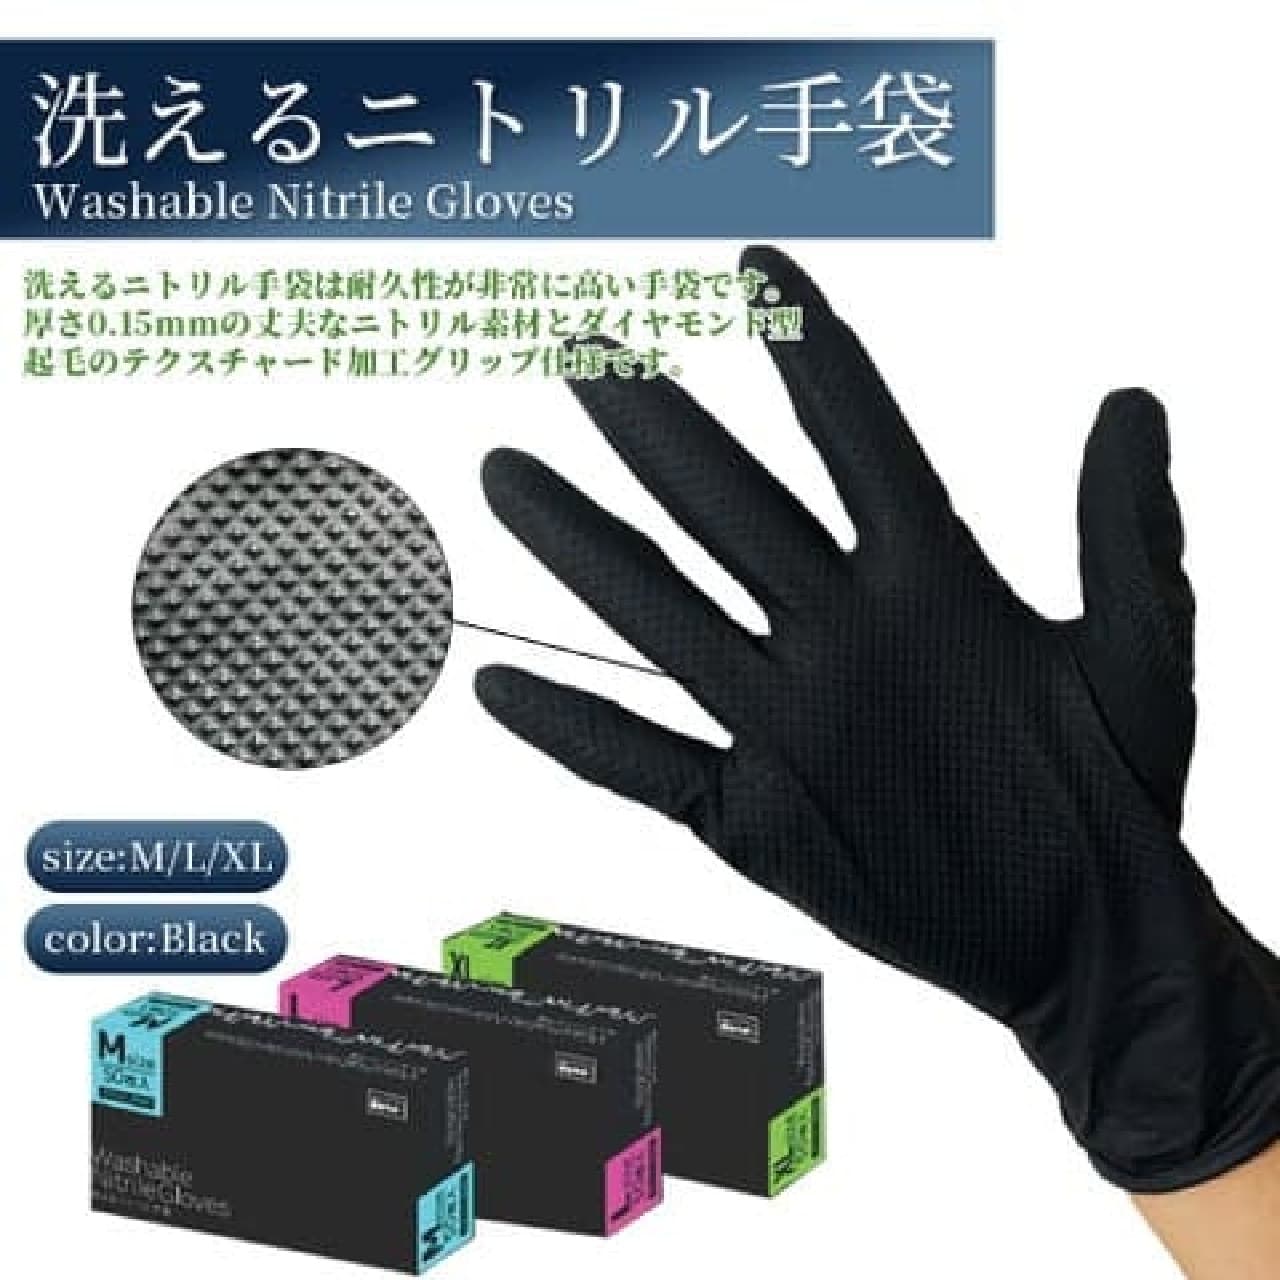 TSC to Launch Washable Nitrile Gloves on October 10, 2023! High Performance Hygiene Gloves for Industrial and Food Factories] Image 3